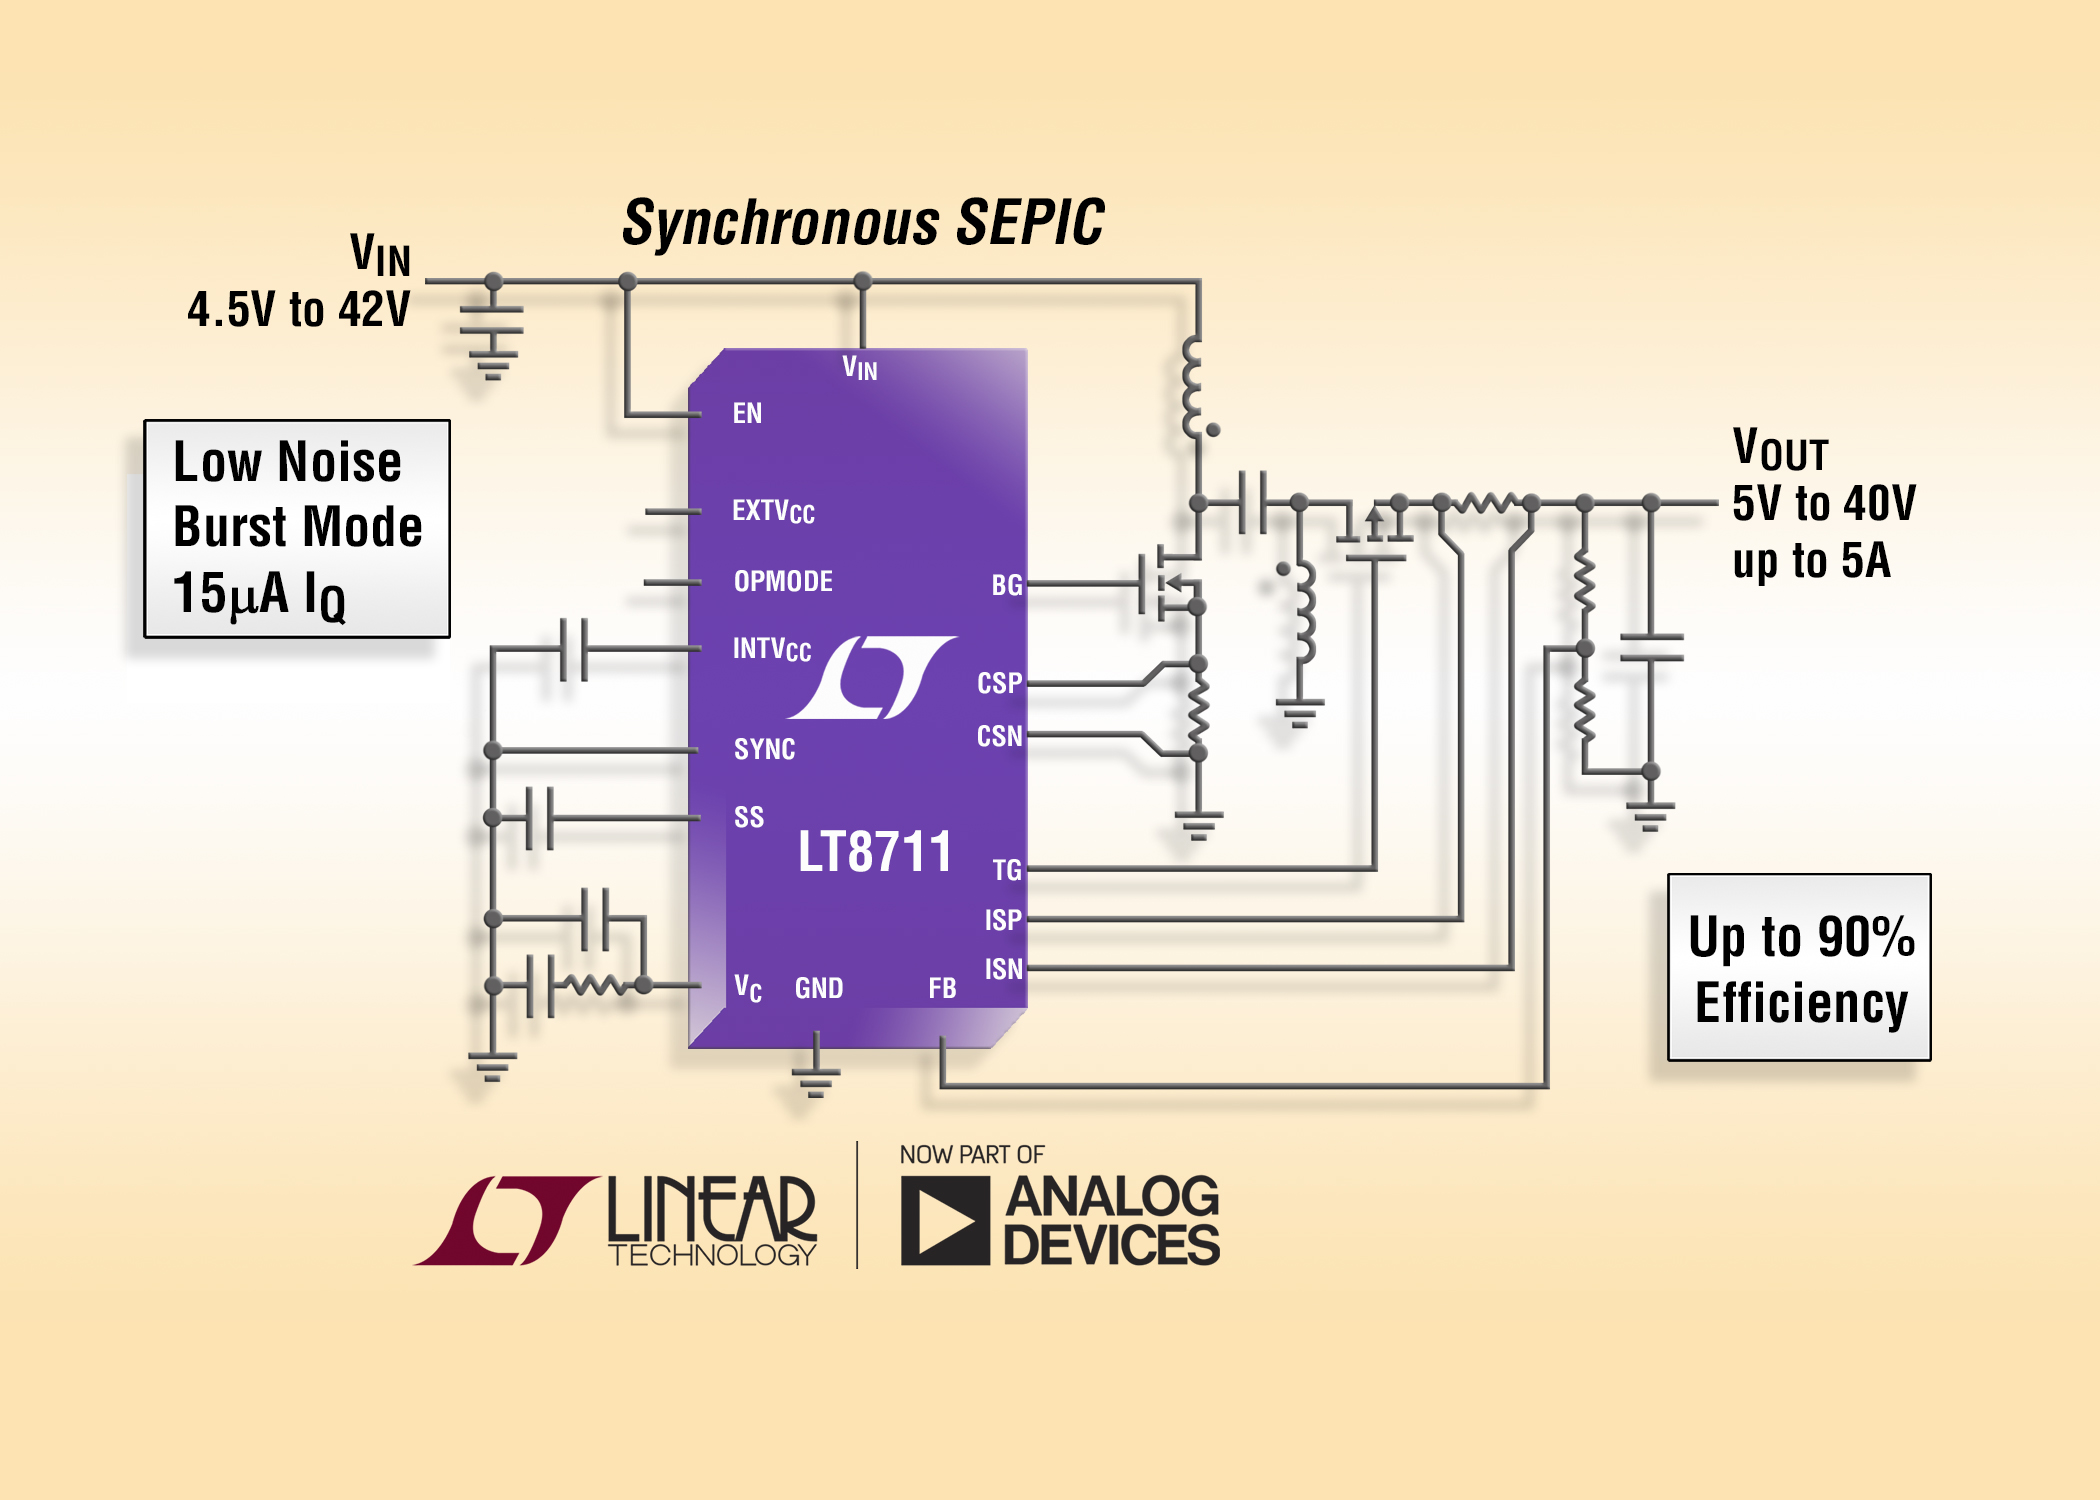 42V Multitopology DC/DC Controller with 15μA IQ Provides Five Converter Topologies at Up to 10A Output Current